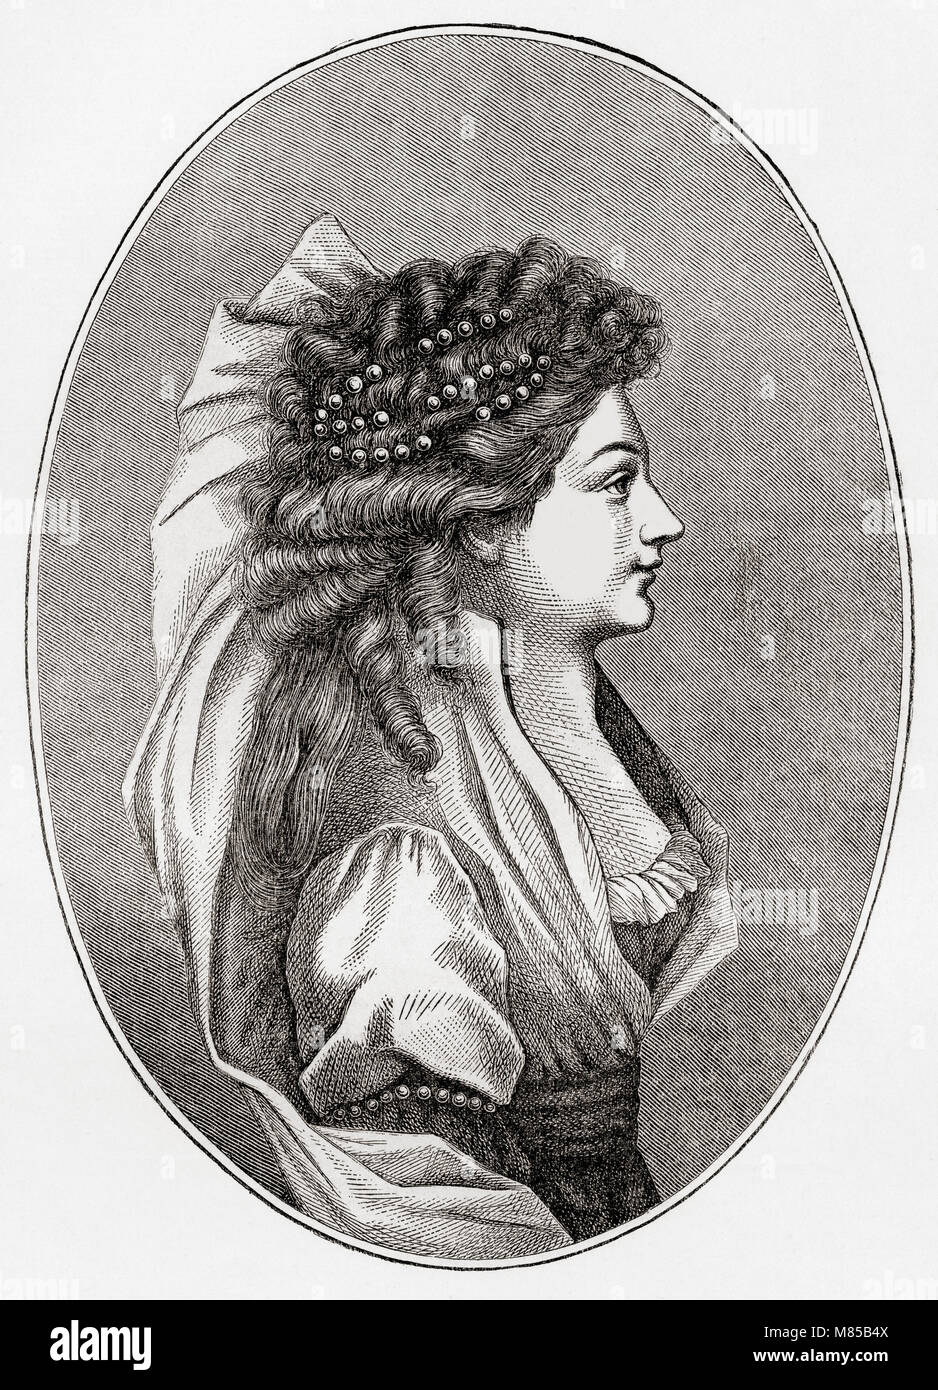 Duchess Louise of Mecklenburg-Strelitz, 1776 – 1810. Queen of Prussia as the wife of King Frederick William III. From Ward and Lock's Illustrated History of the World, published c.1882. Stock Photo